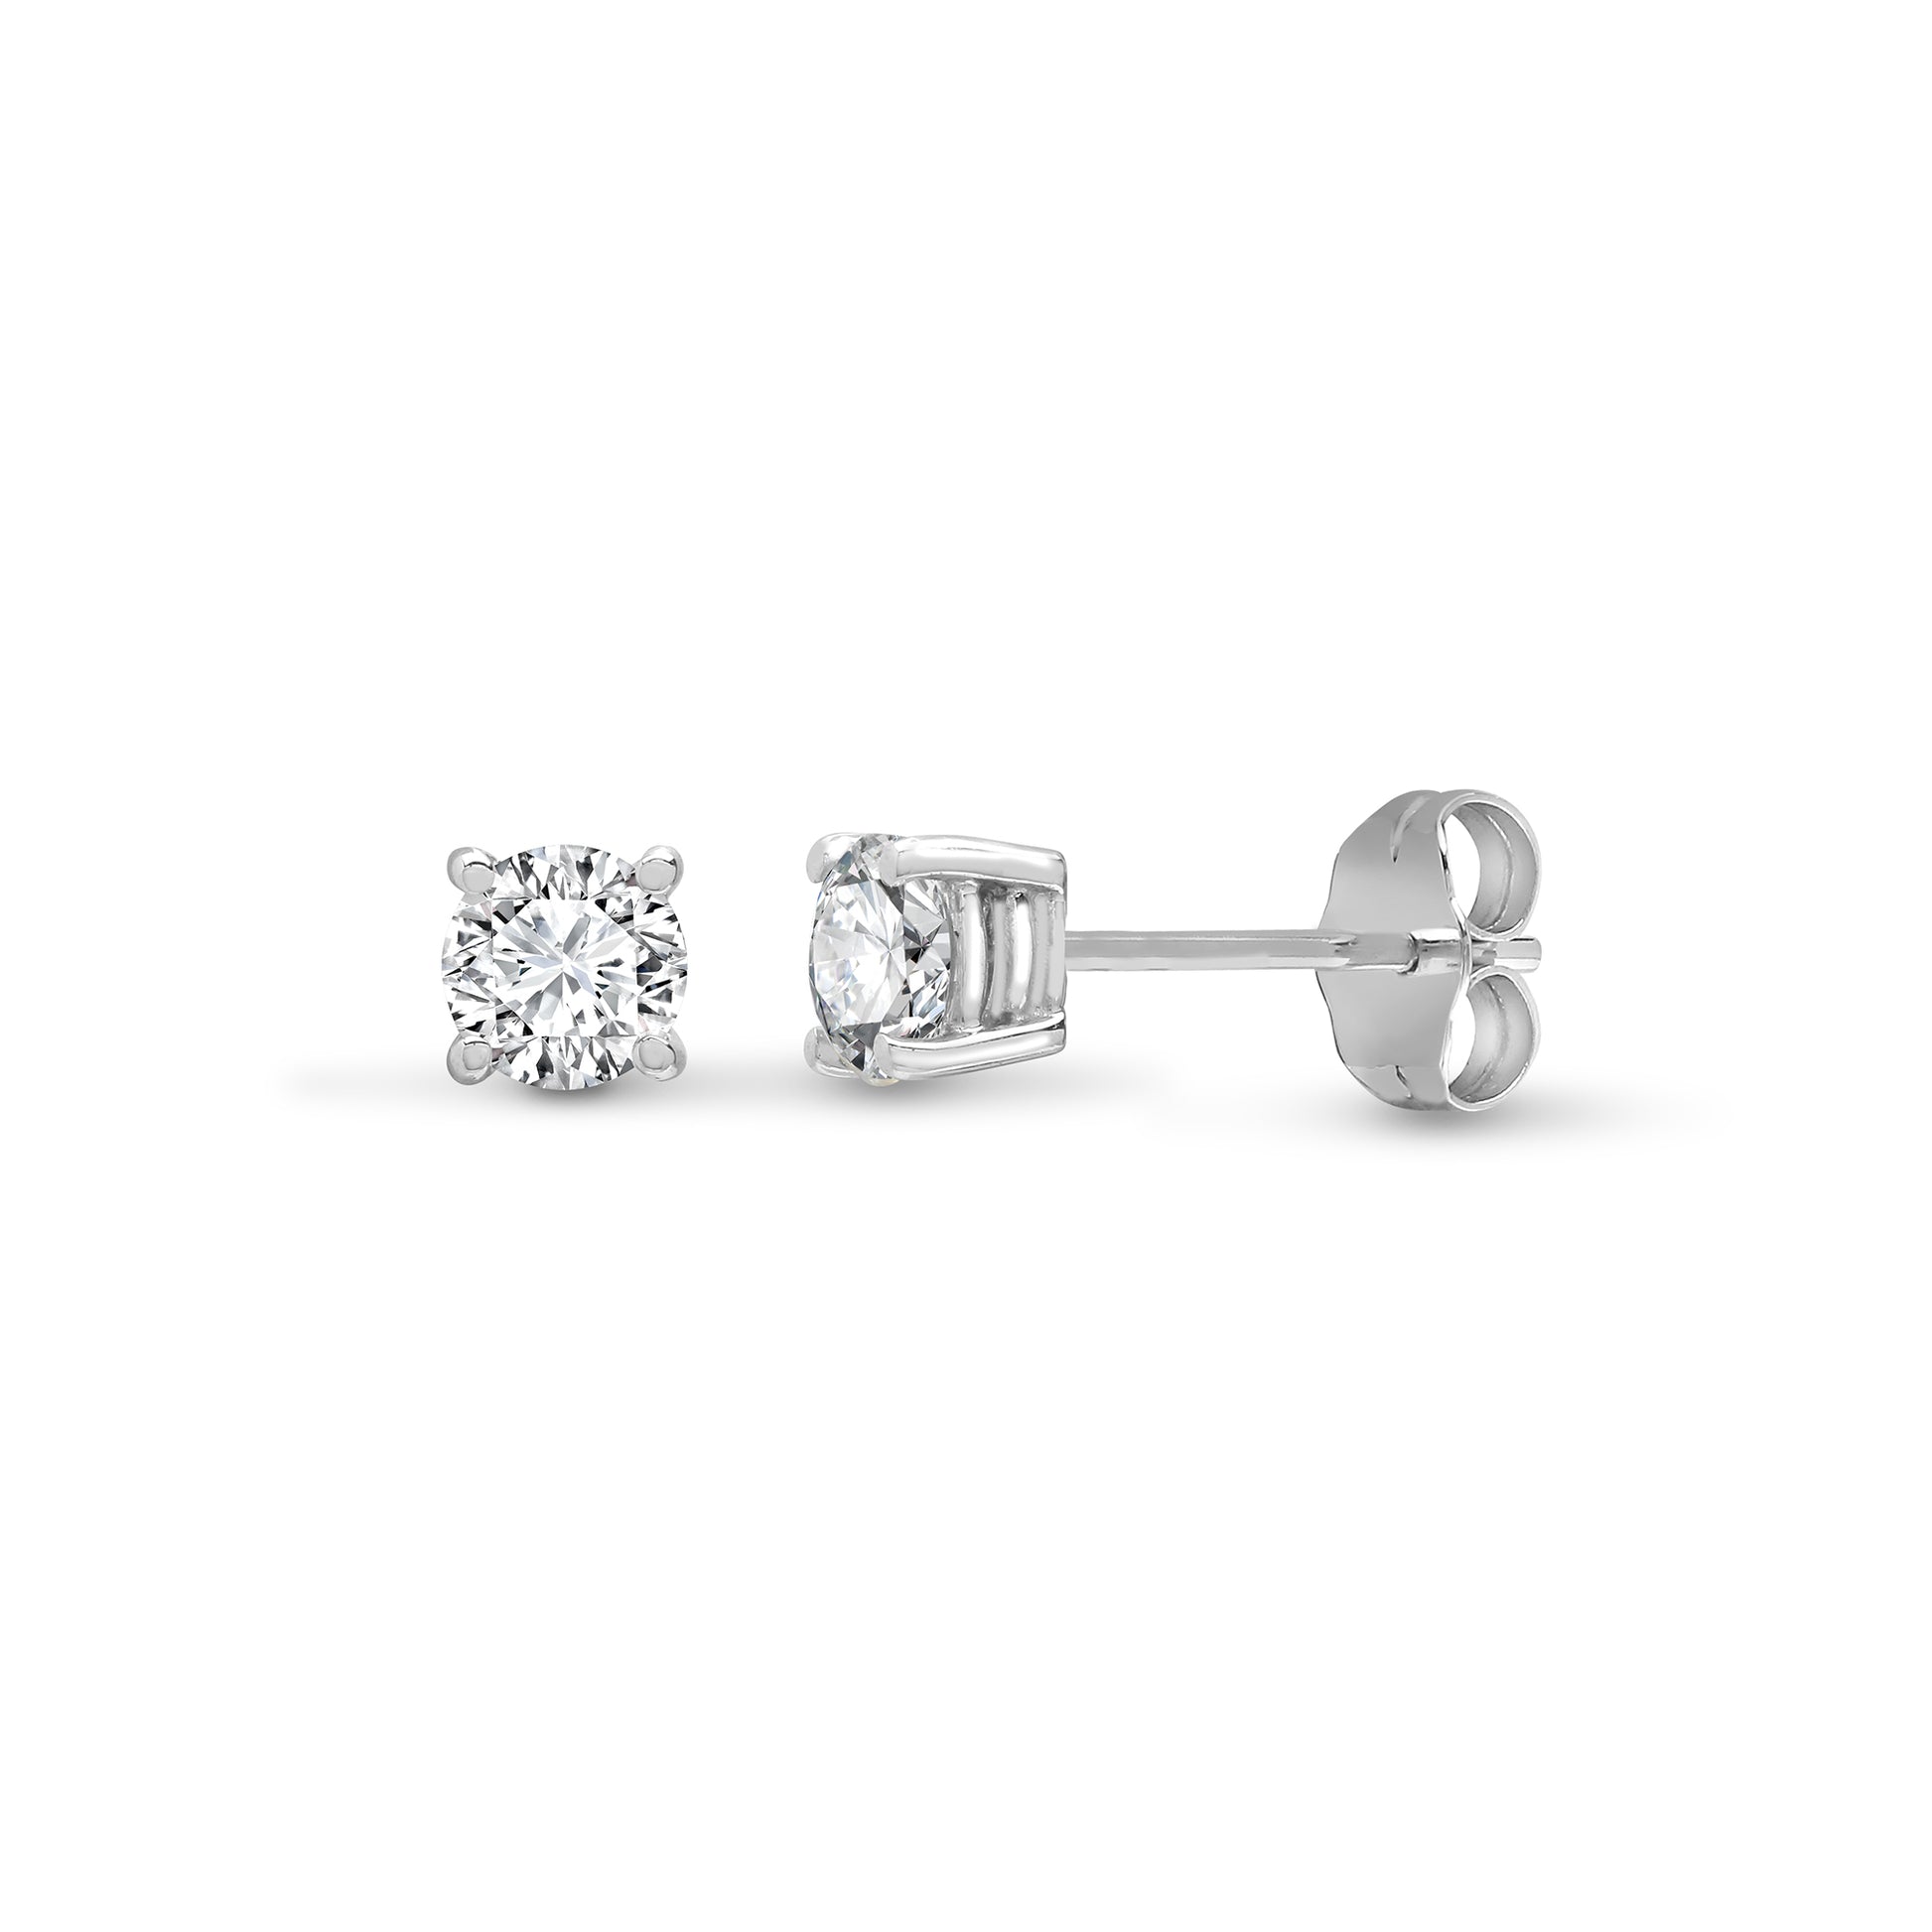 18ct White Gold  0.75ct Diamond Solitaire Stud Earrings - 18E005-075